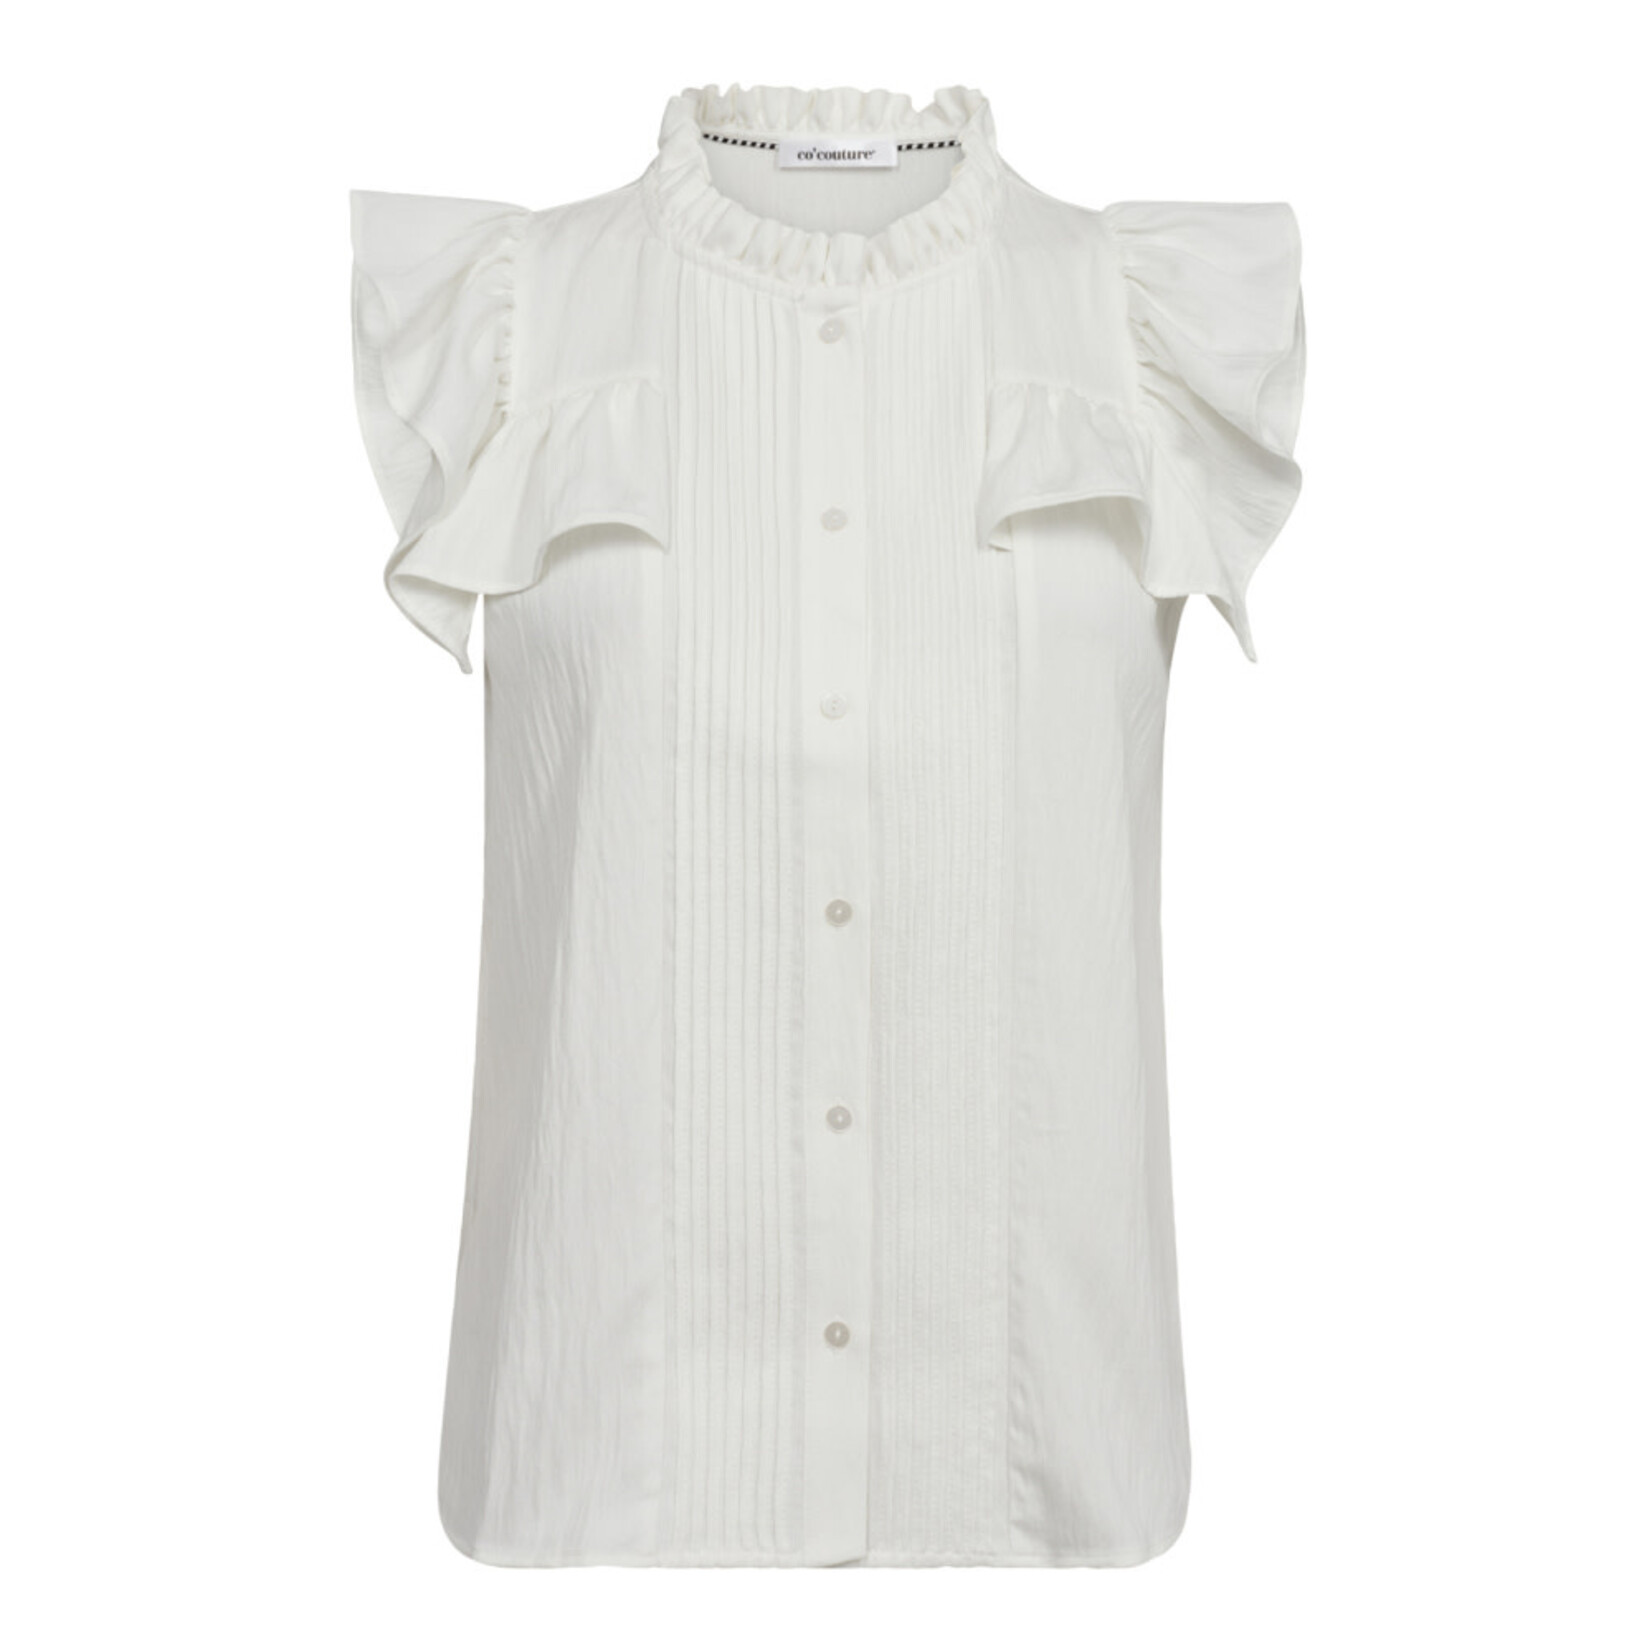 Co'couture Sueda pin tuck top White